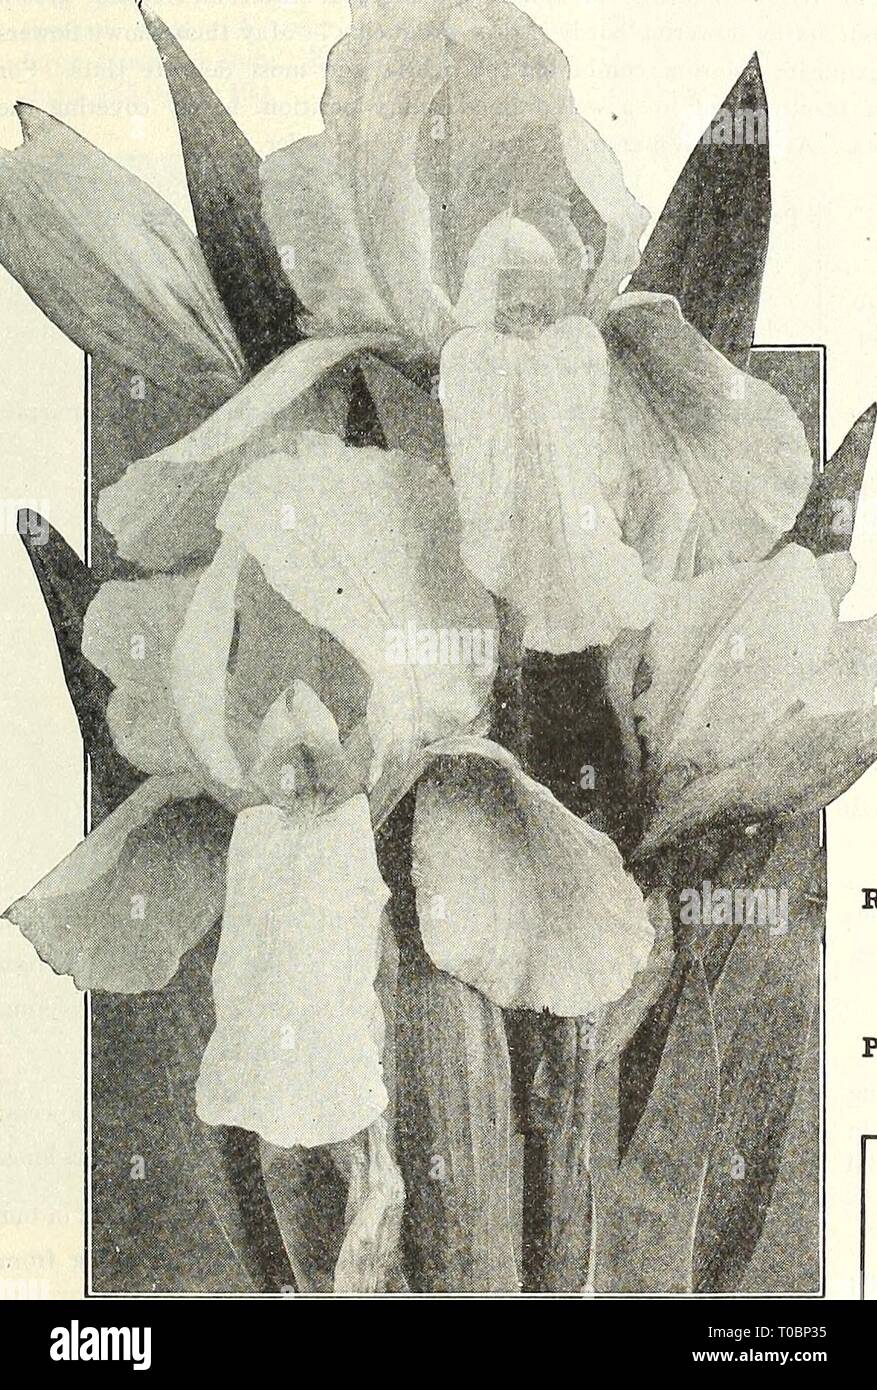 Dreer's garden book 1923 (1923) Dreer's garden book 1923 dreersgardenbook1923henr Year: 1923  (flEHByAJKEElt^ HARDY PERENNIAL PIANTS mamn 183 JAPANESE IRIS (IHs Kaempferi) The improved forms of this beautiful flower have placed them in the same rank popu- larly as the Hardy Phloxes and Peonies. Coming into flower about the middle of June, and continuing for five or six weeks, they fill in a period when flowers of this attractive type are particularly welcome. They succeed in almost any soil and position, but like rich soil and plenty of water when they are forming their buds and developing the Stock Photo